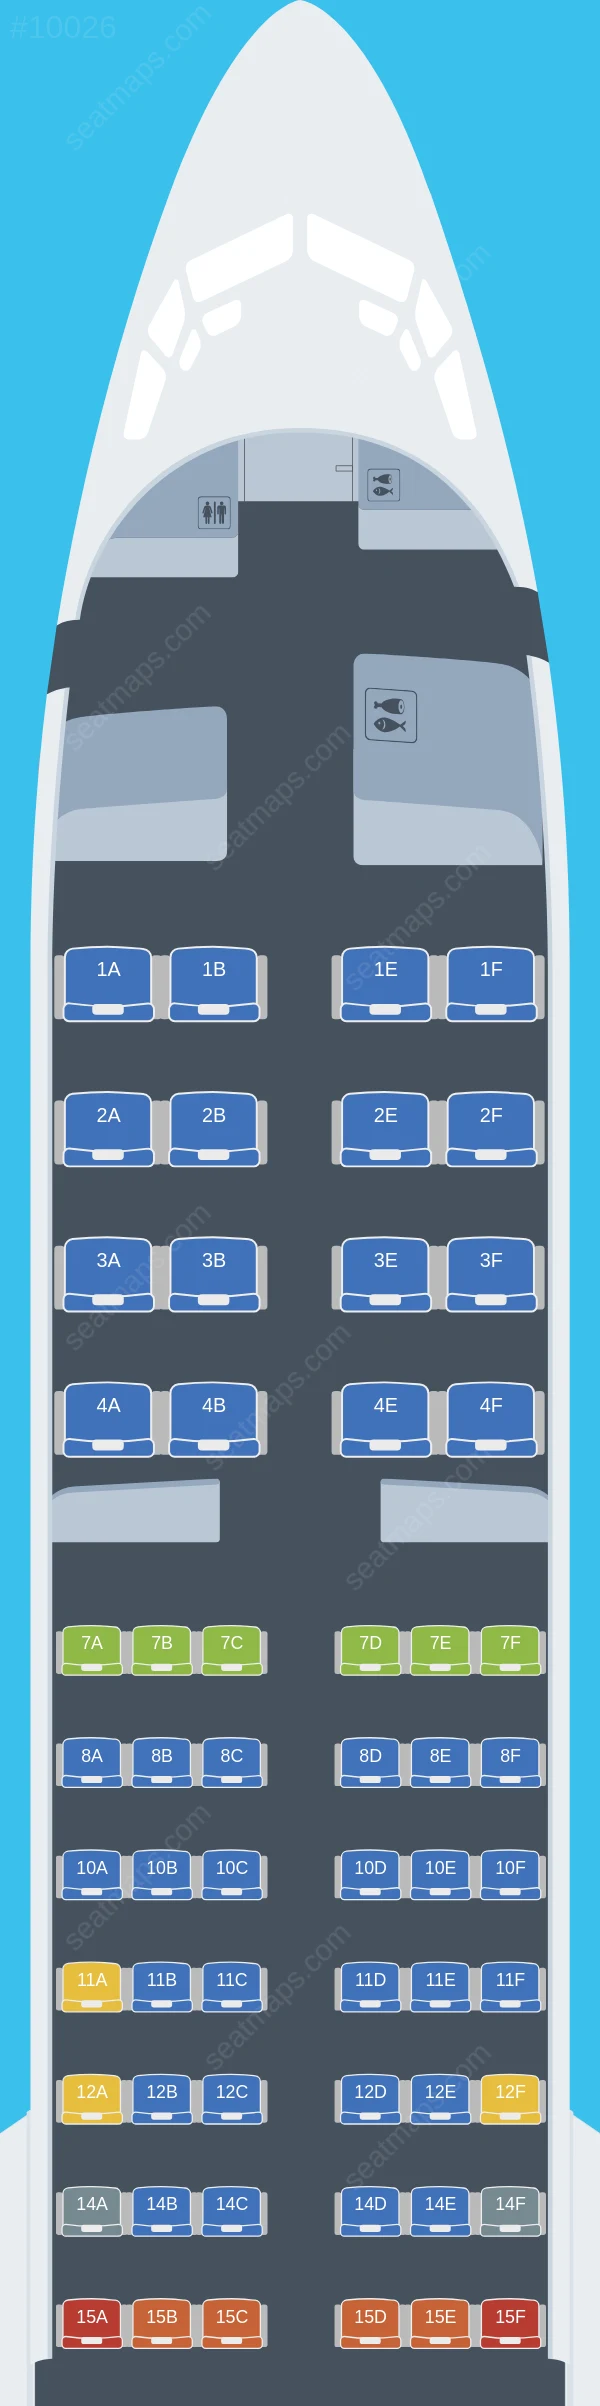 United Boeing 737 MAX 8 seatmap preview